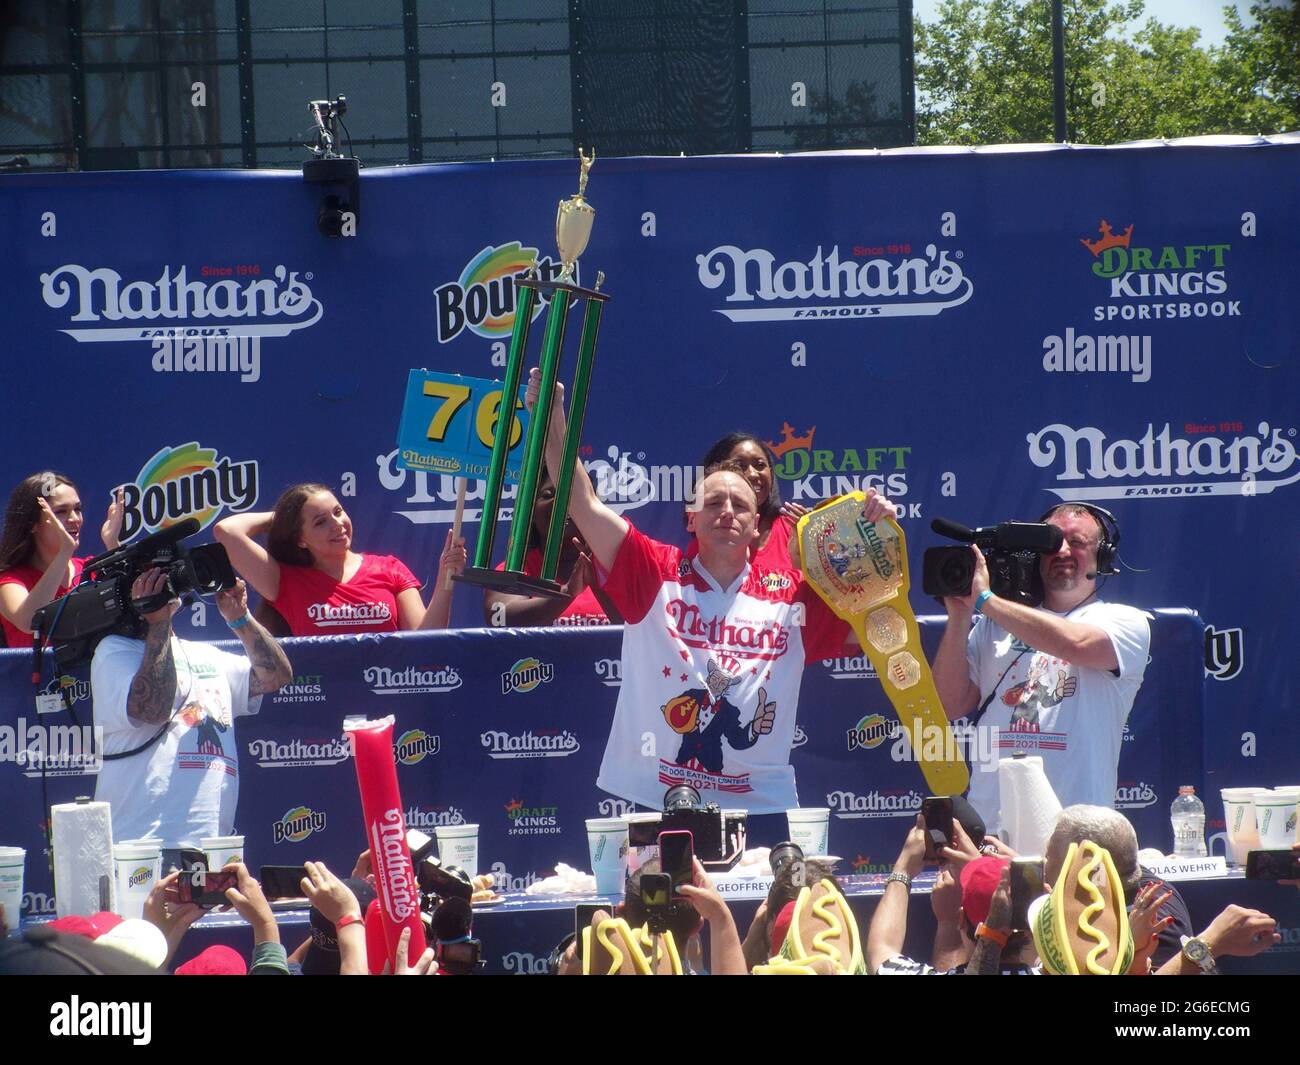 New York, New York, USA. 4th July, 2021. NATHAN'S FAMOUS FOURTH OF JULY HOT DOG-EATING CONTEST. AT CONEY ISLAND'S PARK.World champion Joey Chestnut defend his title against the world's top